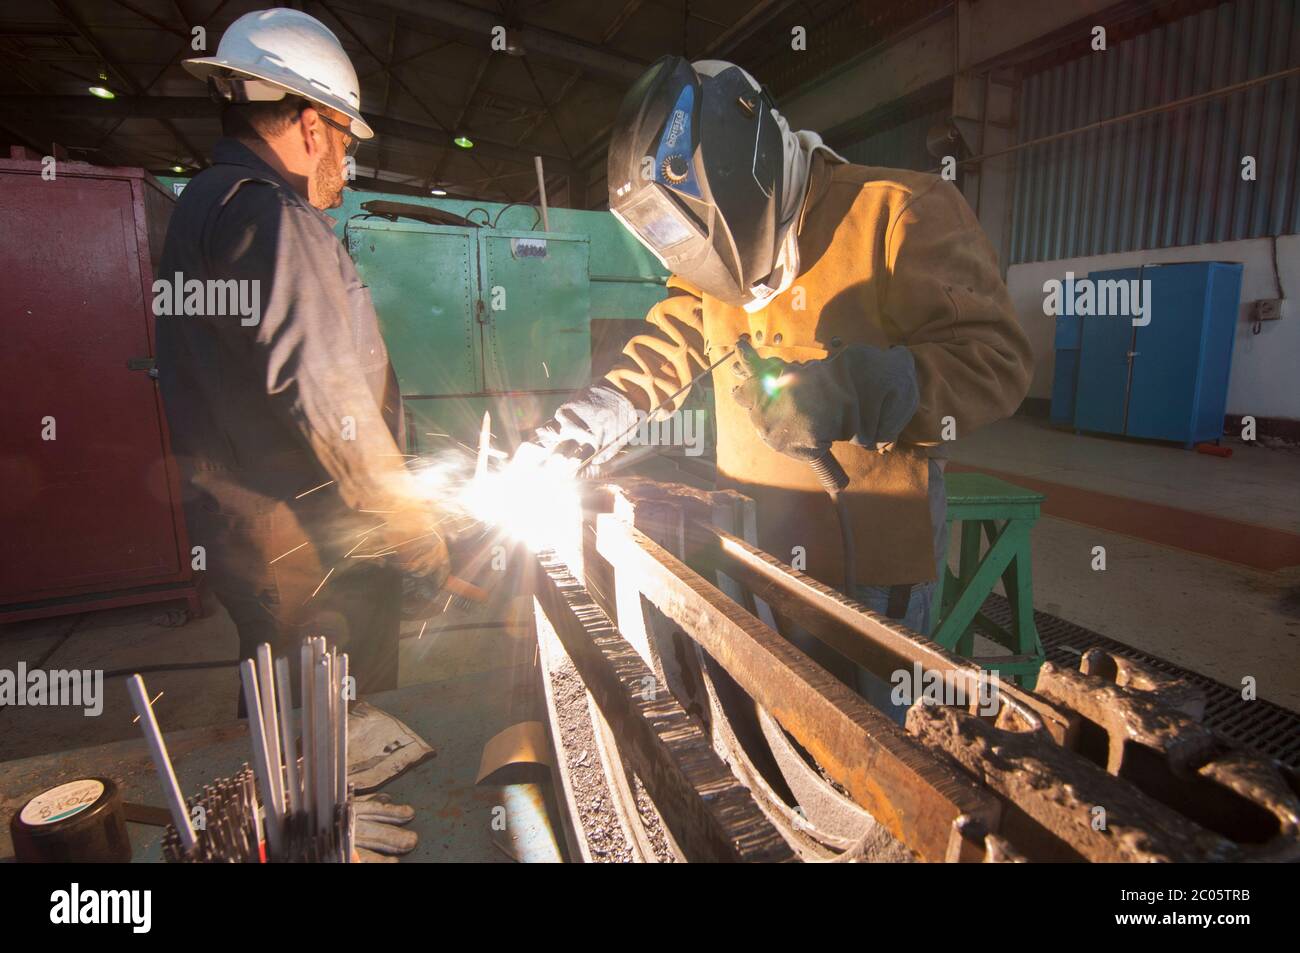 Employees in a Geothermal power plant performing welding jobs and a training program in the mechanic workshop as part of a skilled job apprentice plan. Stock Photo